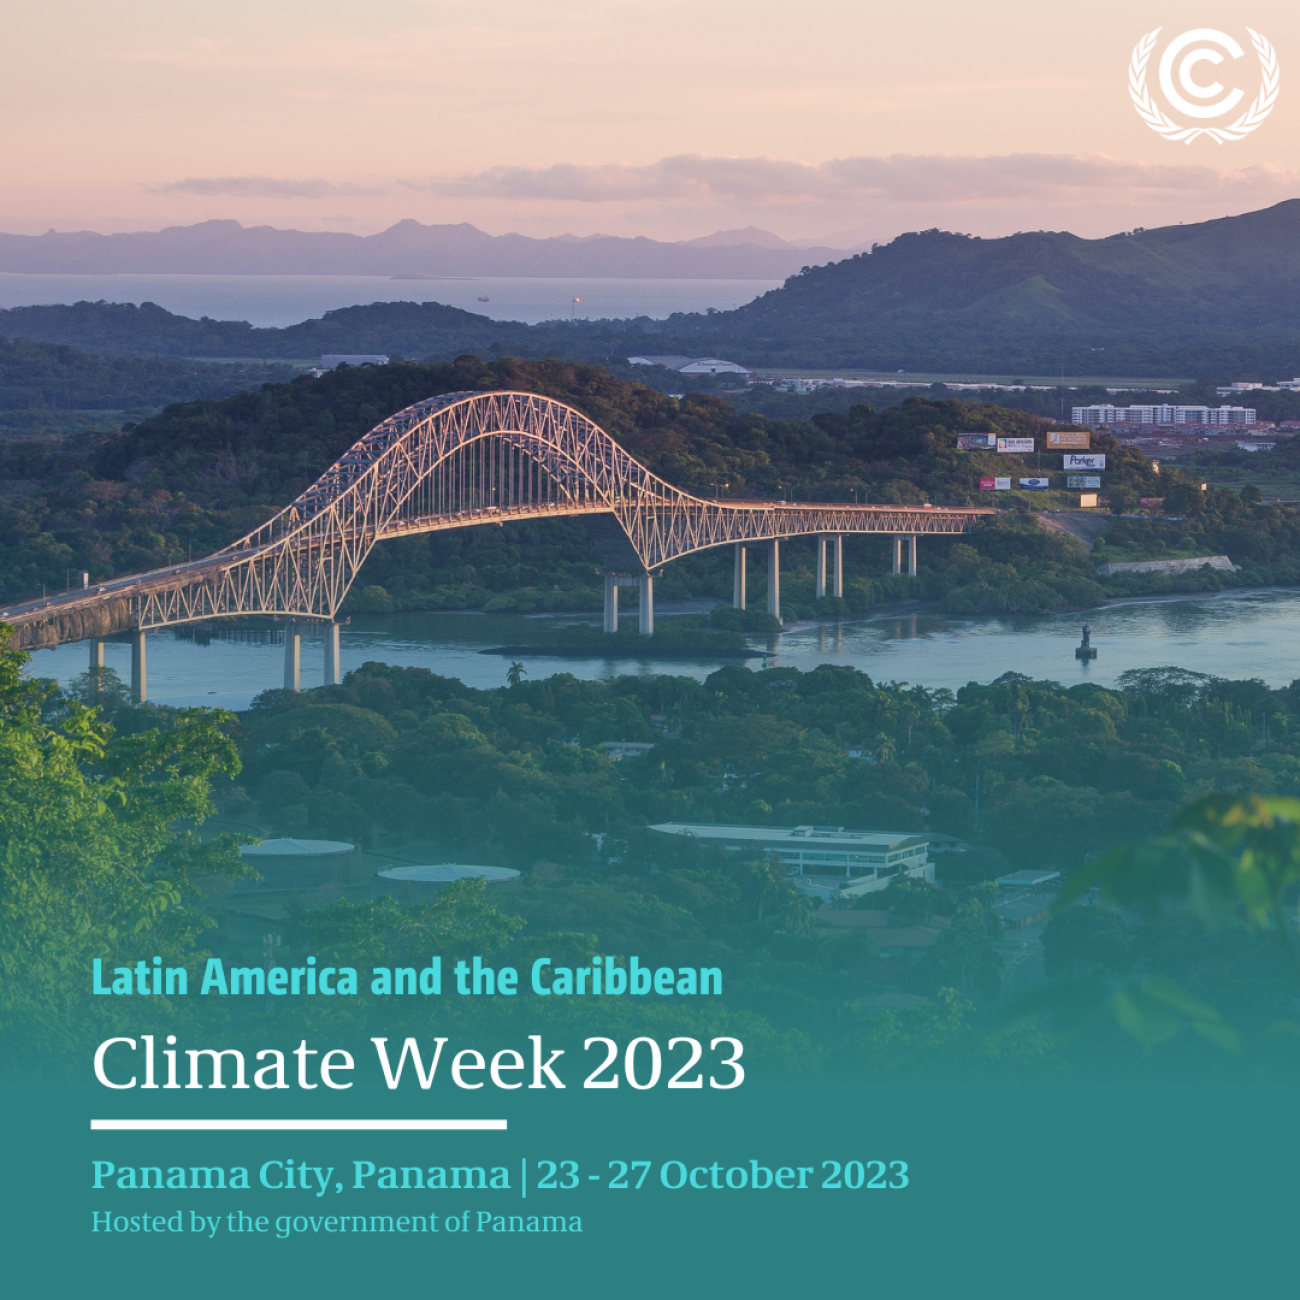 Latin America and the Caribbean Climate Week launches to boost regional